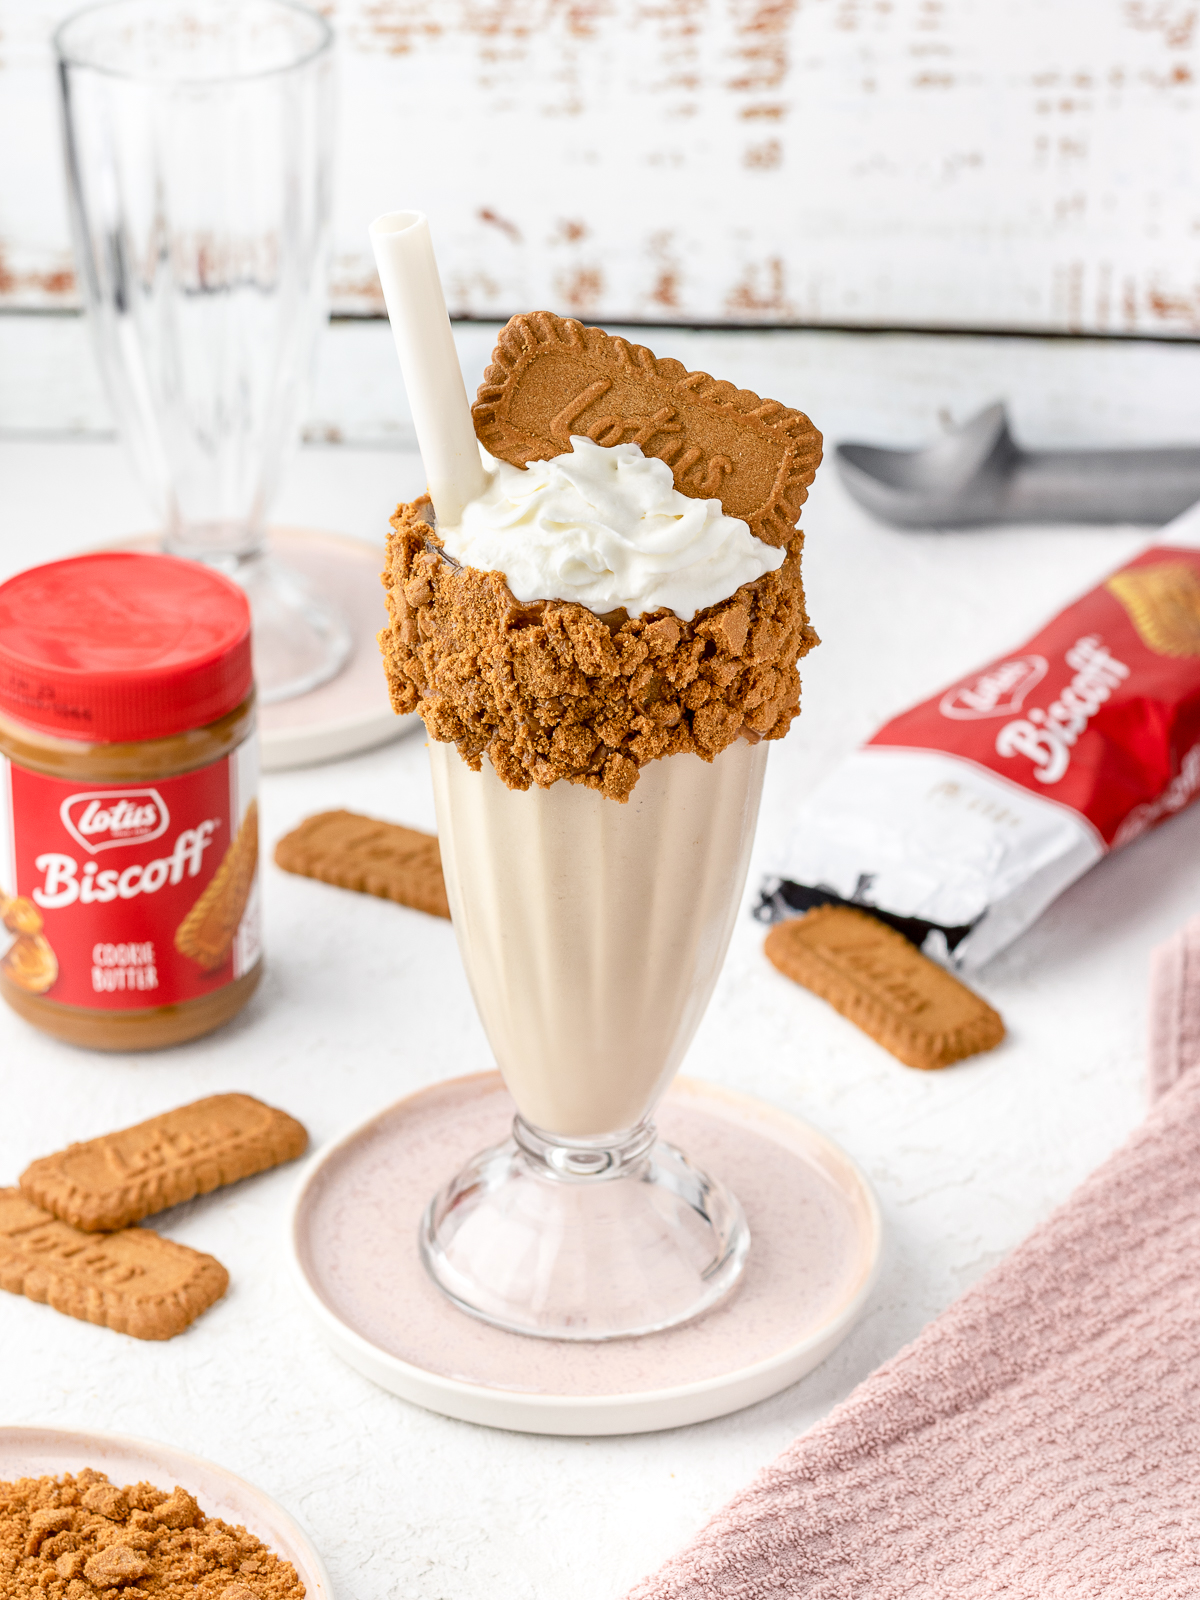 Biscoff Milkshake with cookie butter spread on the side and more biscoff cookies.